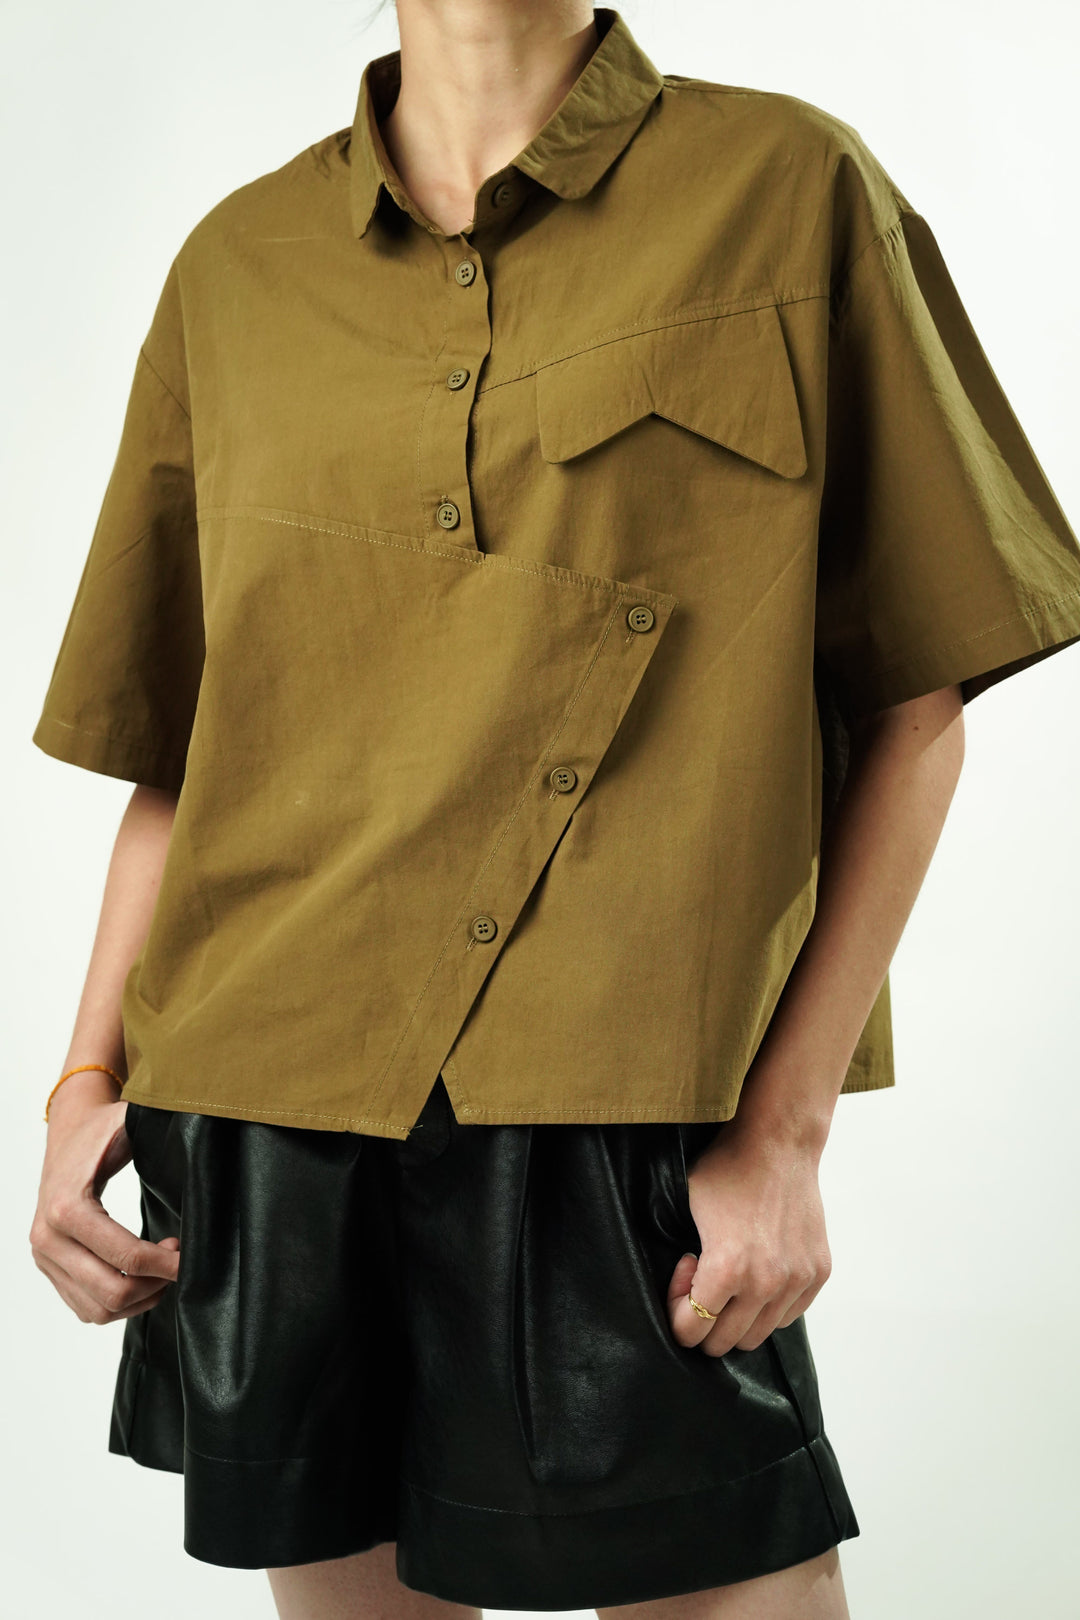 Oversized olive green shirts for women